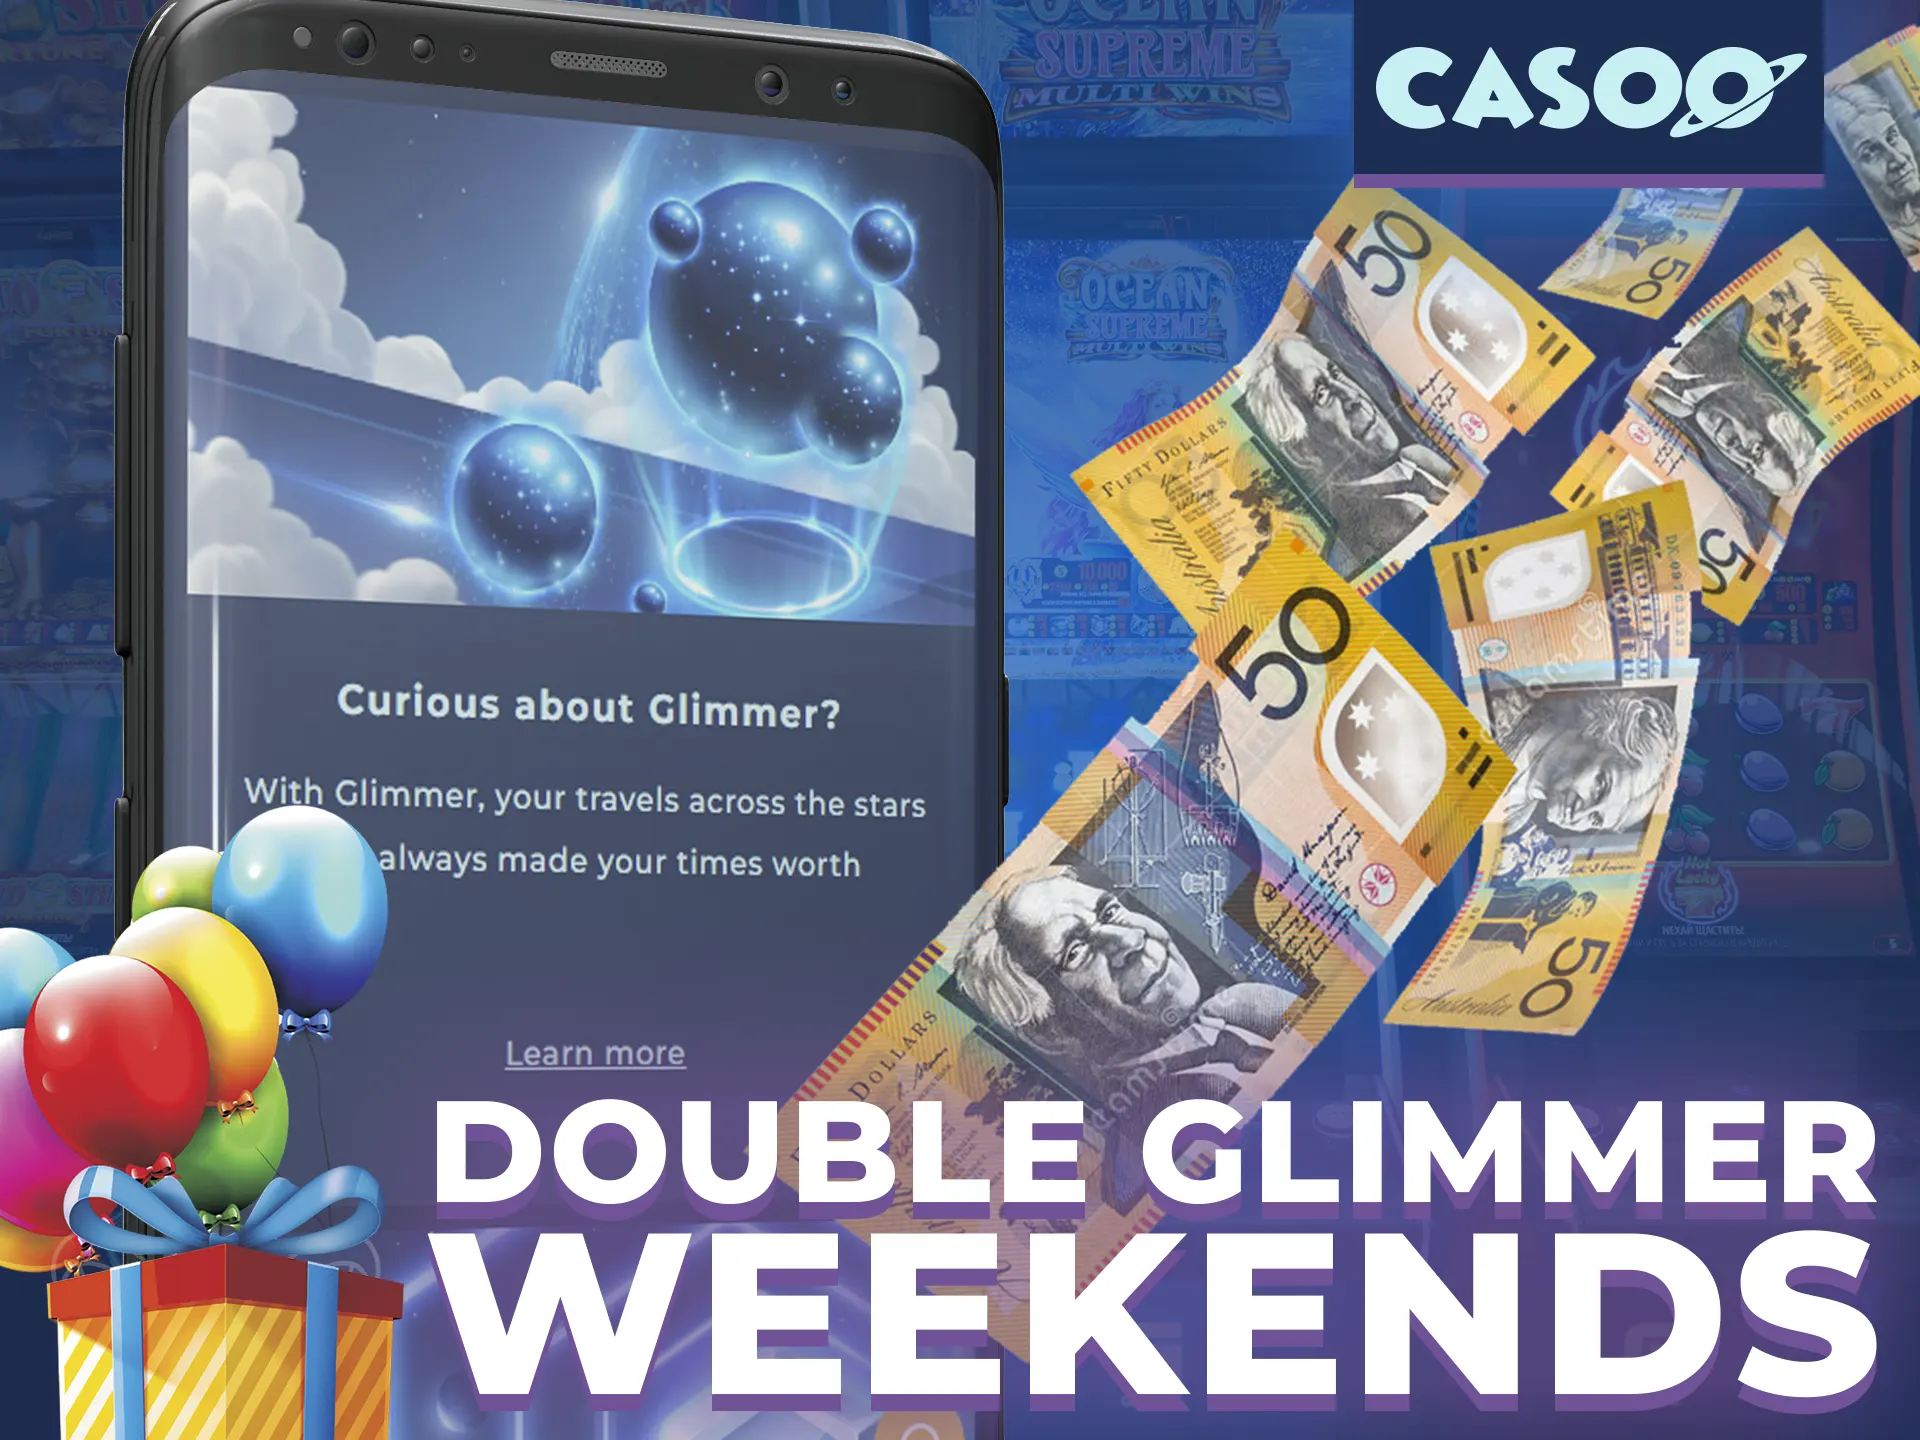 Learn how to get some profits from double glimmer weekends bonus.